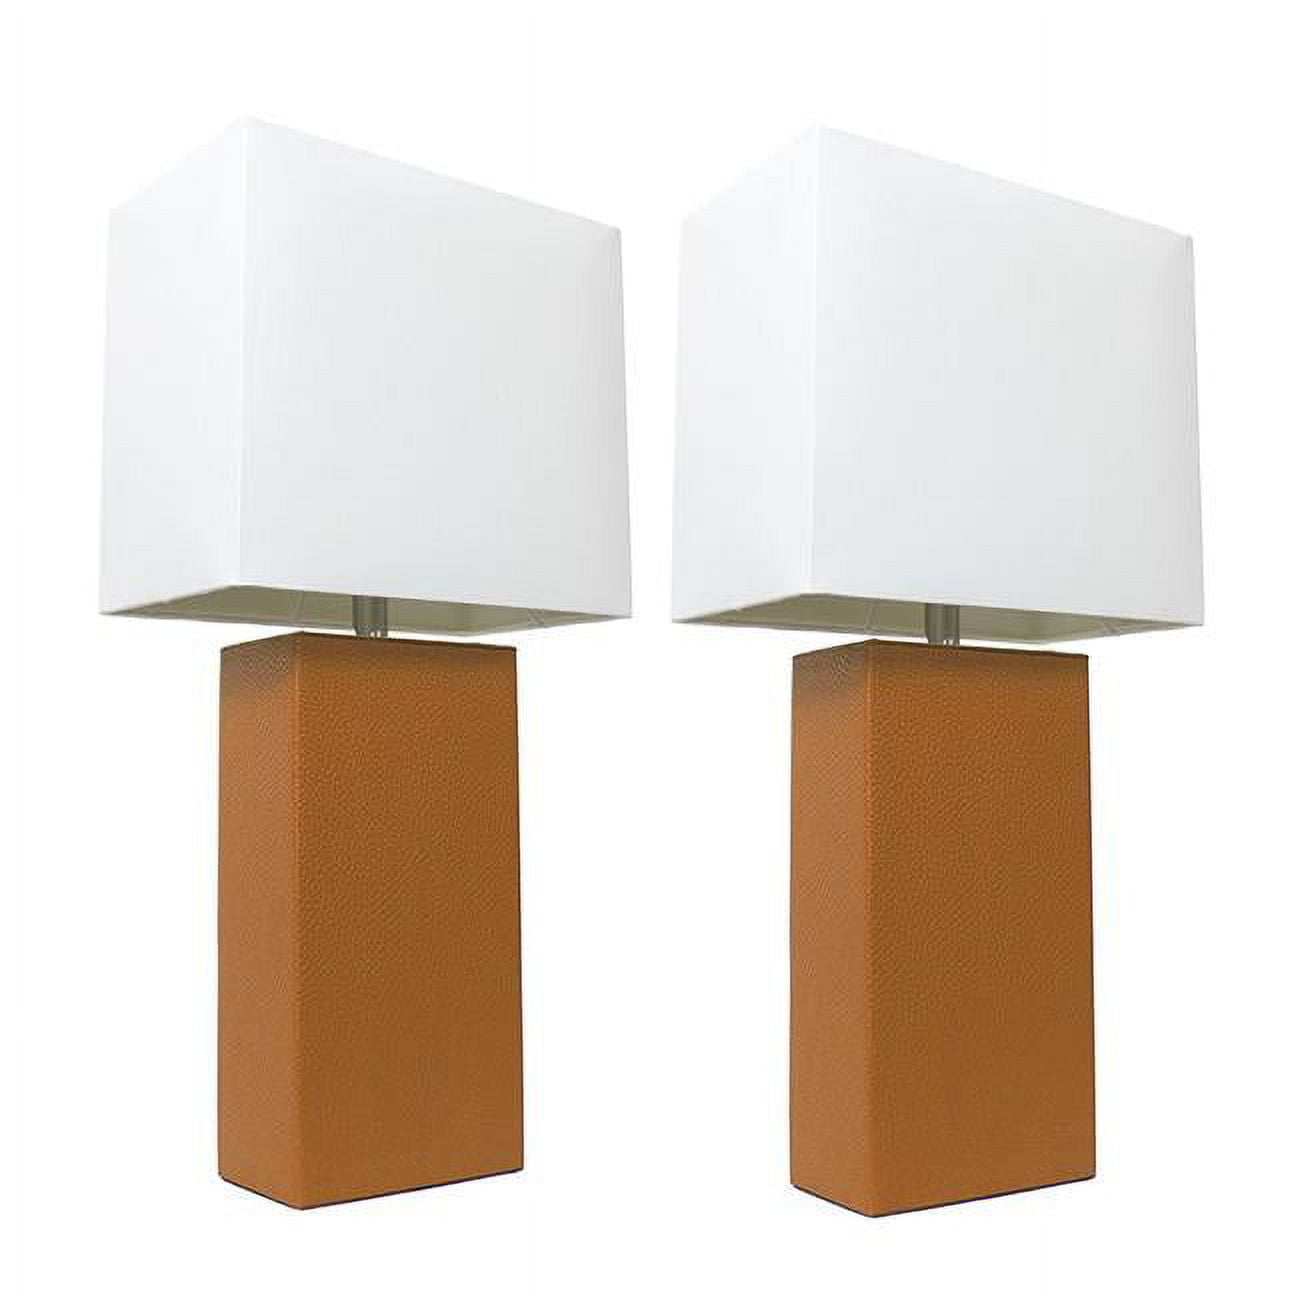 Alltherages Lc2000-tan-2pk Elegant Designs Modern Leather Table Lamp With White Fabric Shade - Tan, Pack Of 2